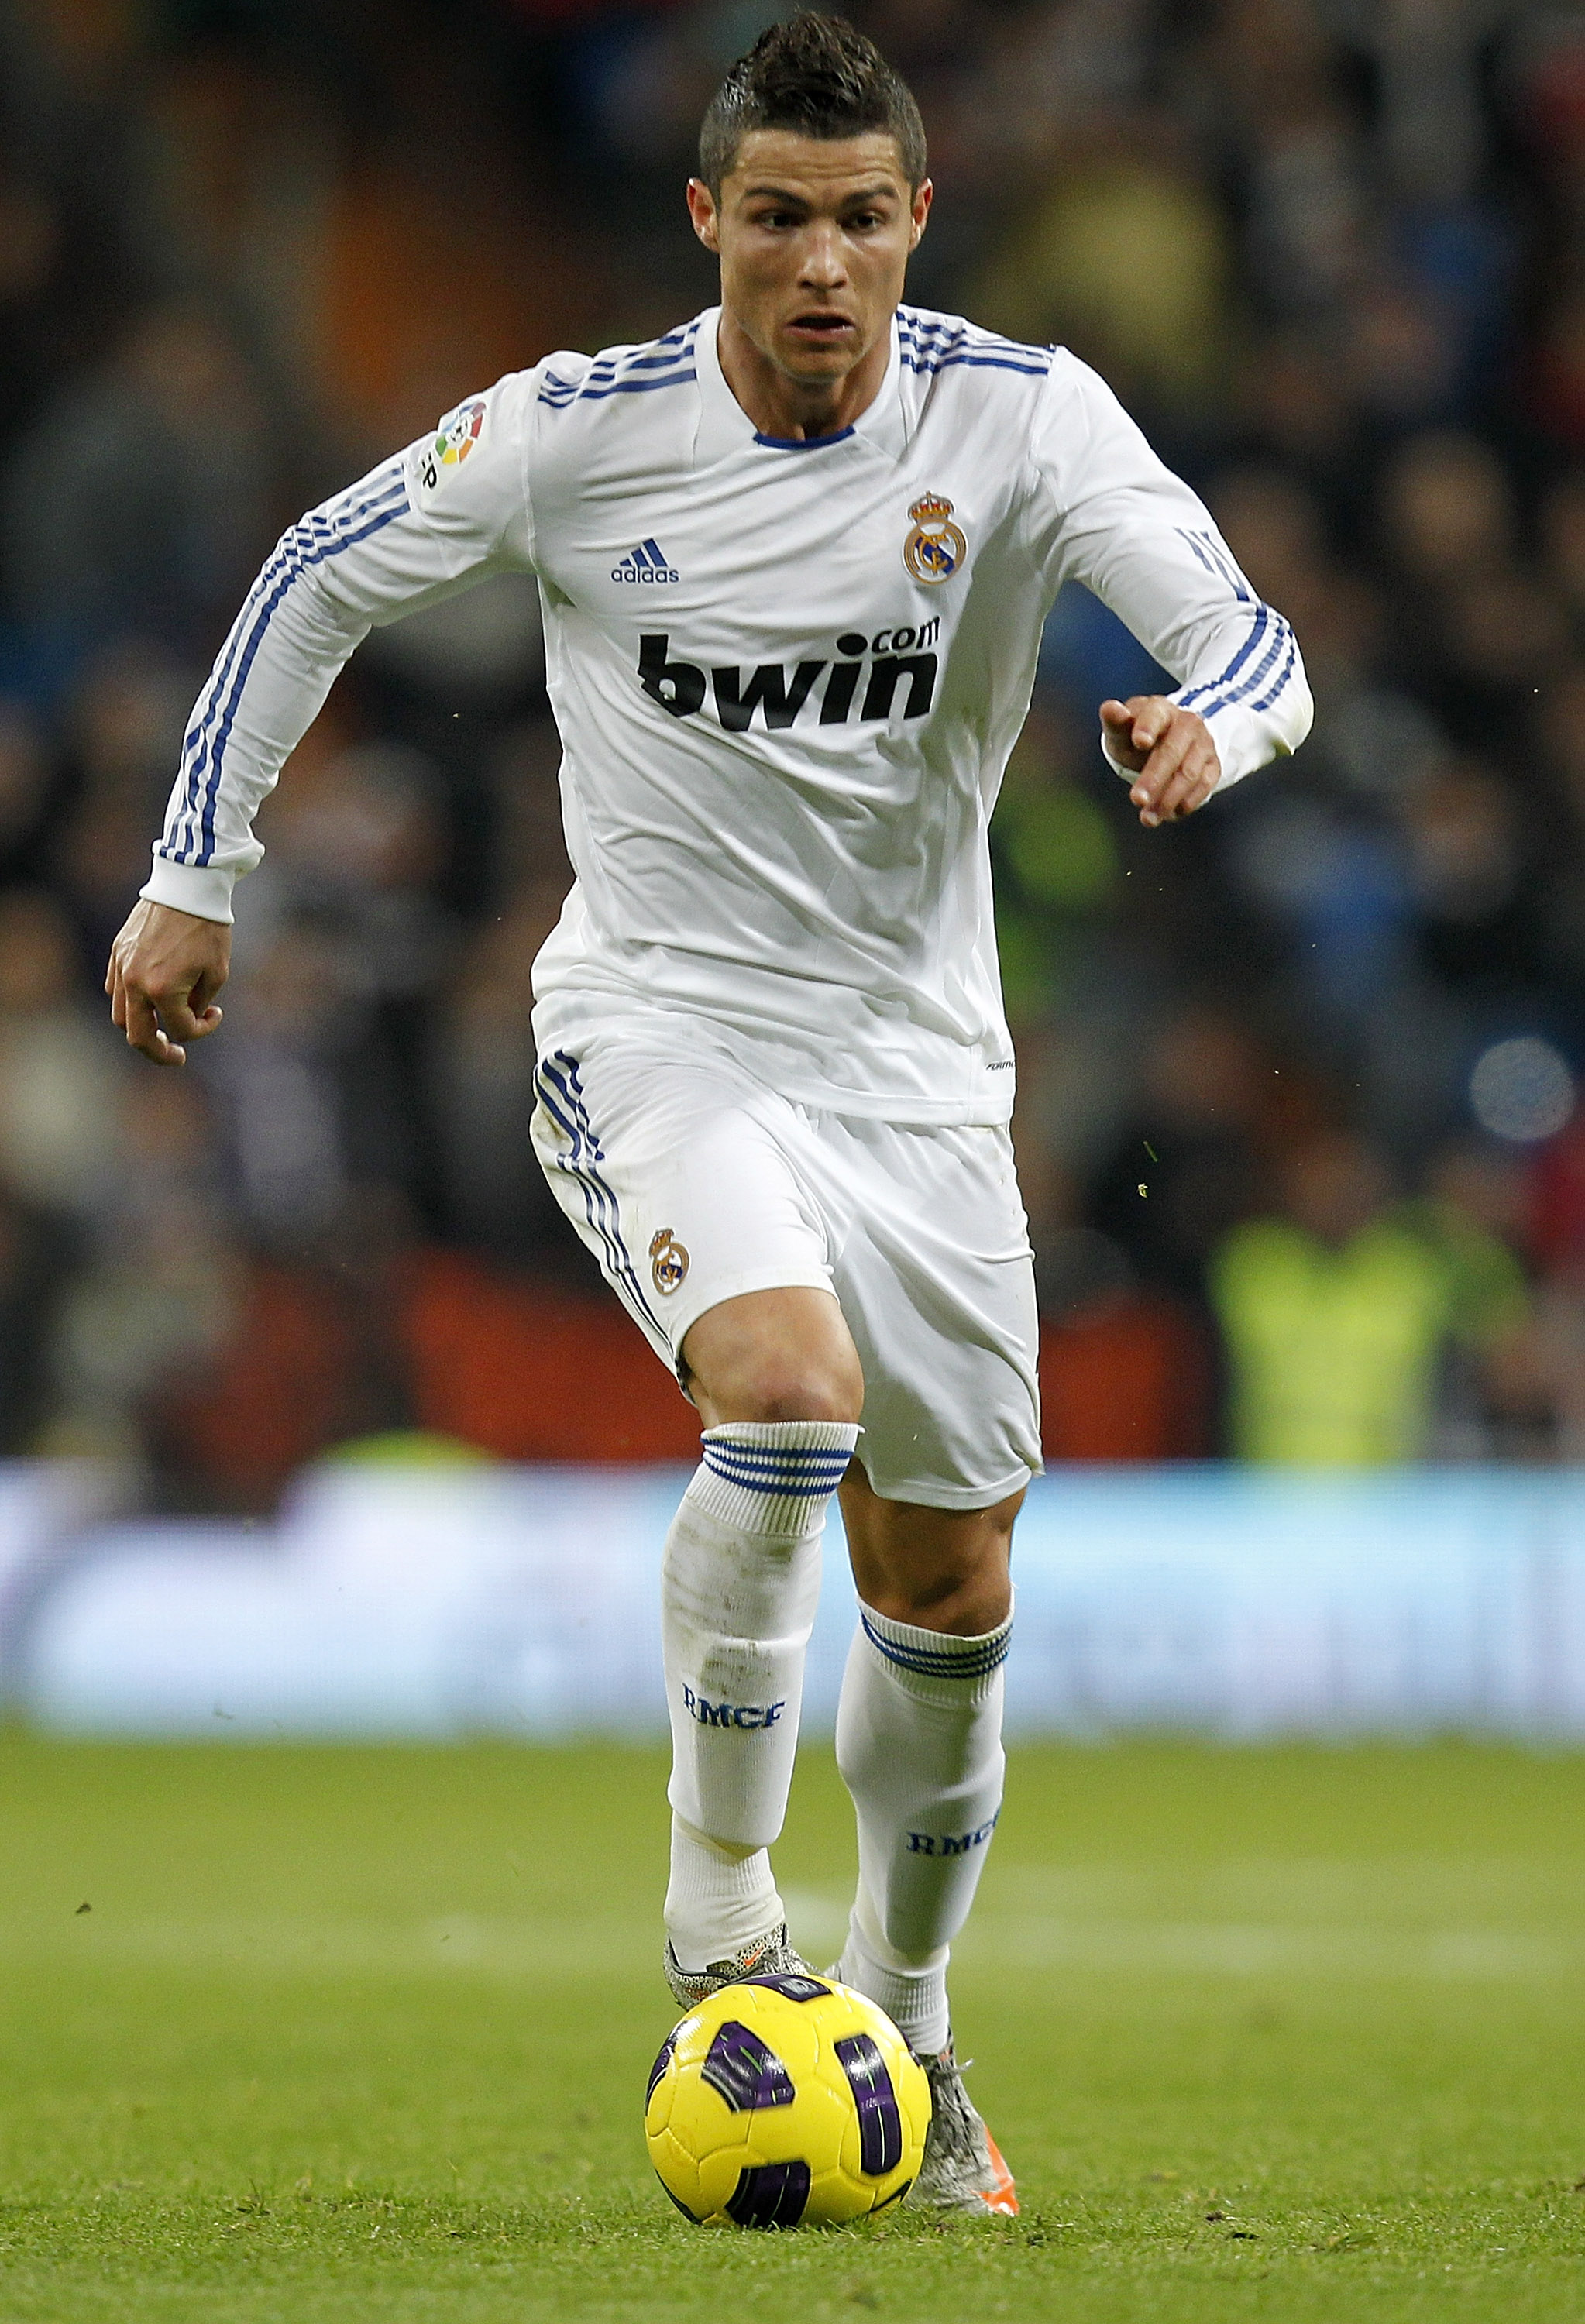 MADRID, SPAIN - DECEMBER 19:  Cristiano Ronaldo of Real Madrid in action during the La Liga match between Real Madrid and Sevilla at Estadio Santiago Bernabeu on December 19, 2010 in Madrid, Spain. Real Madrid won the match 1-0.  (Photo by Angel Martinez/